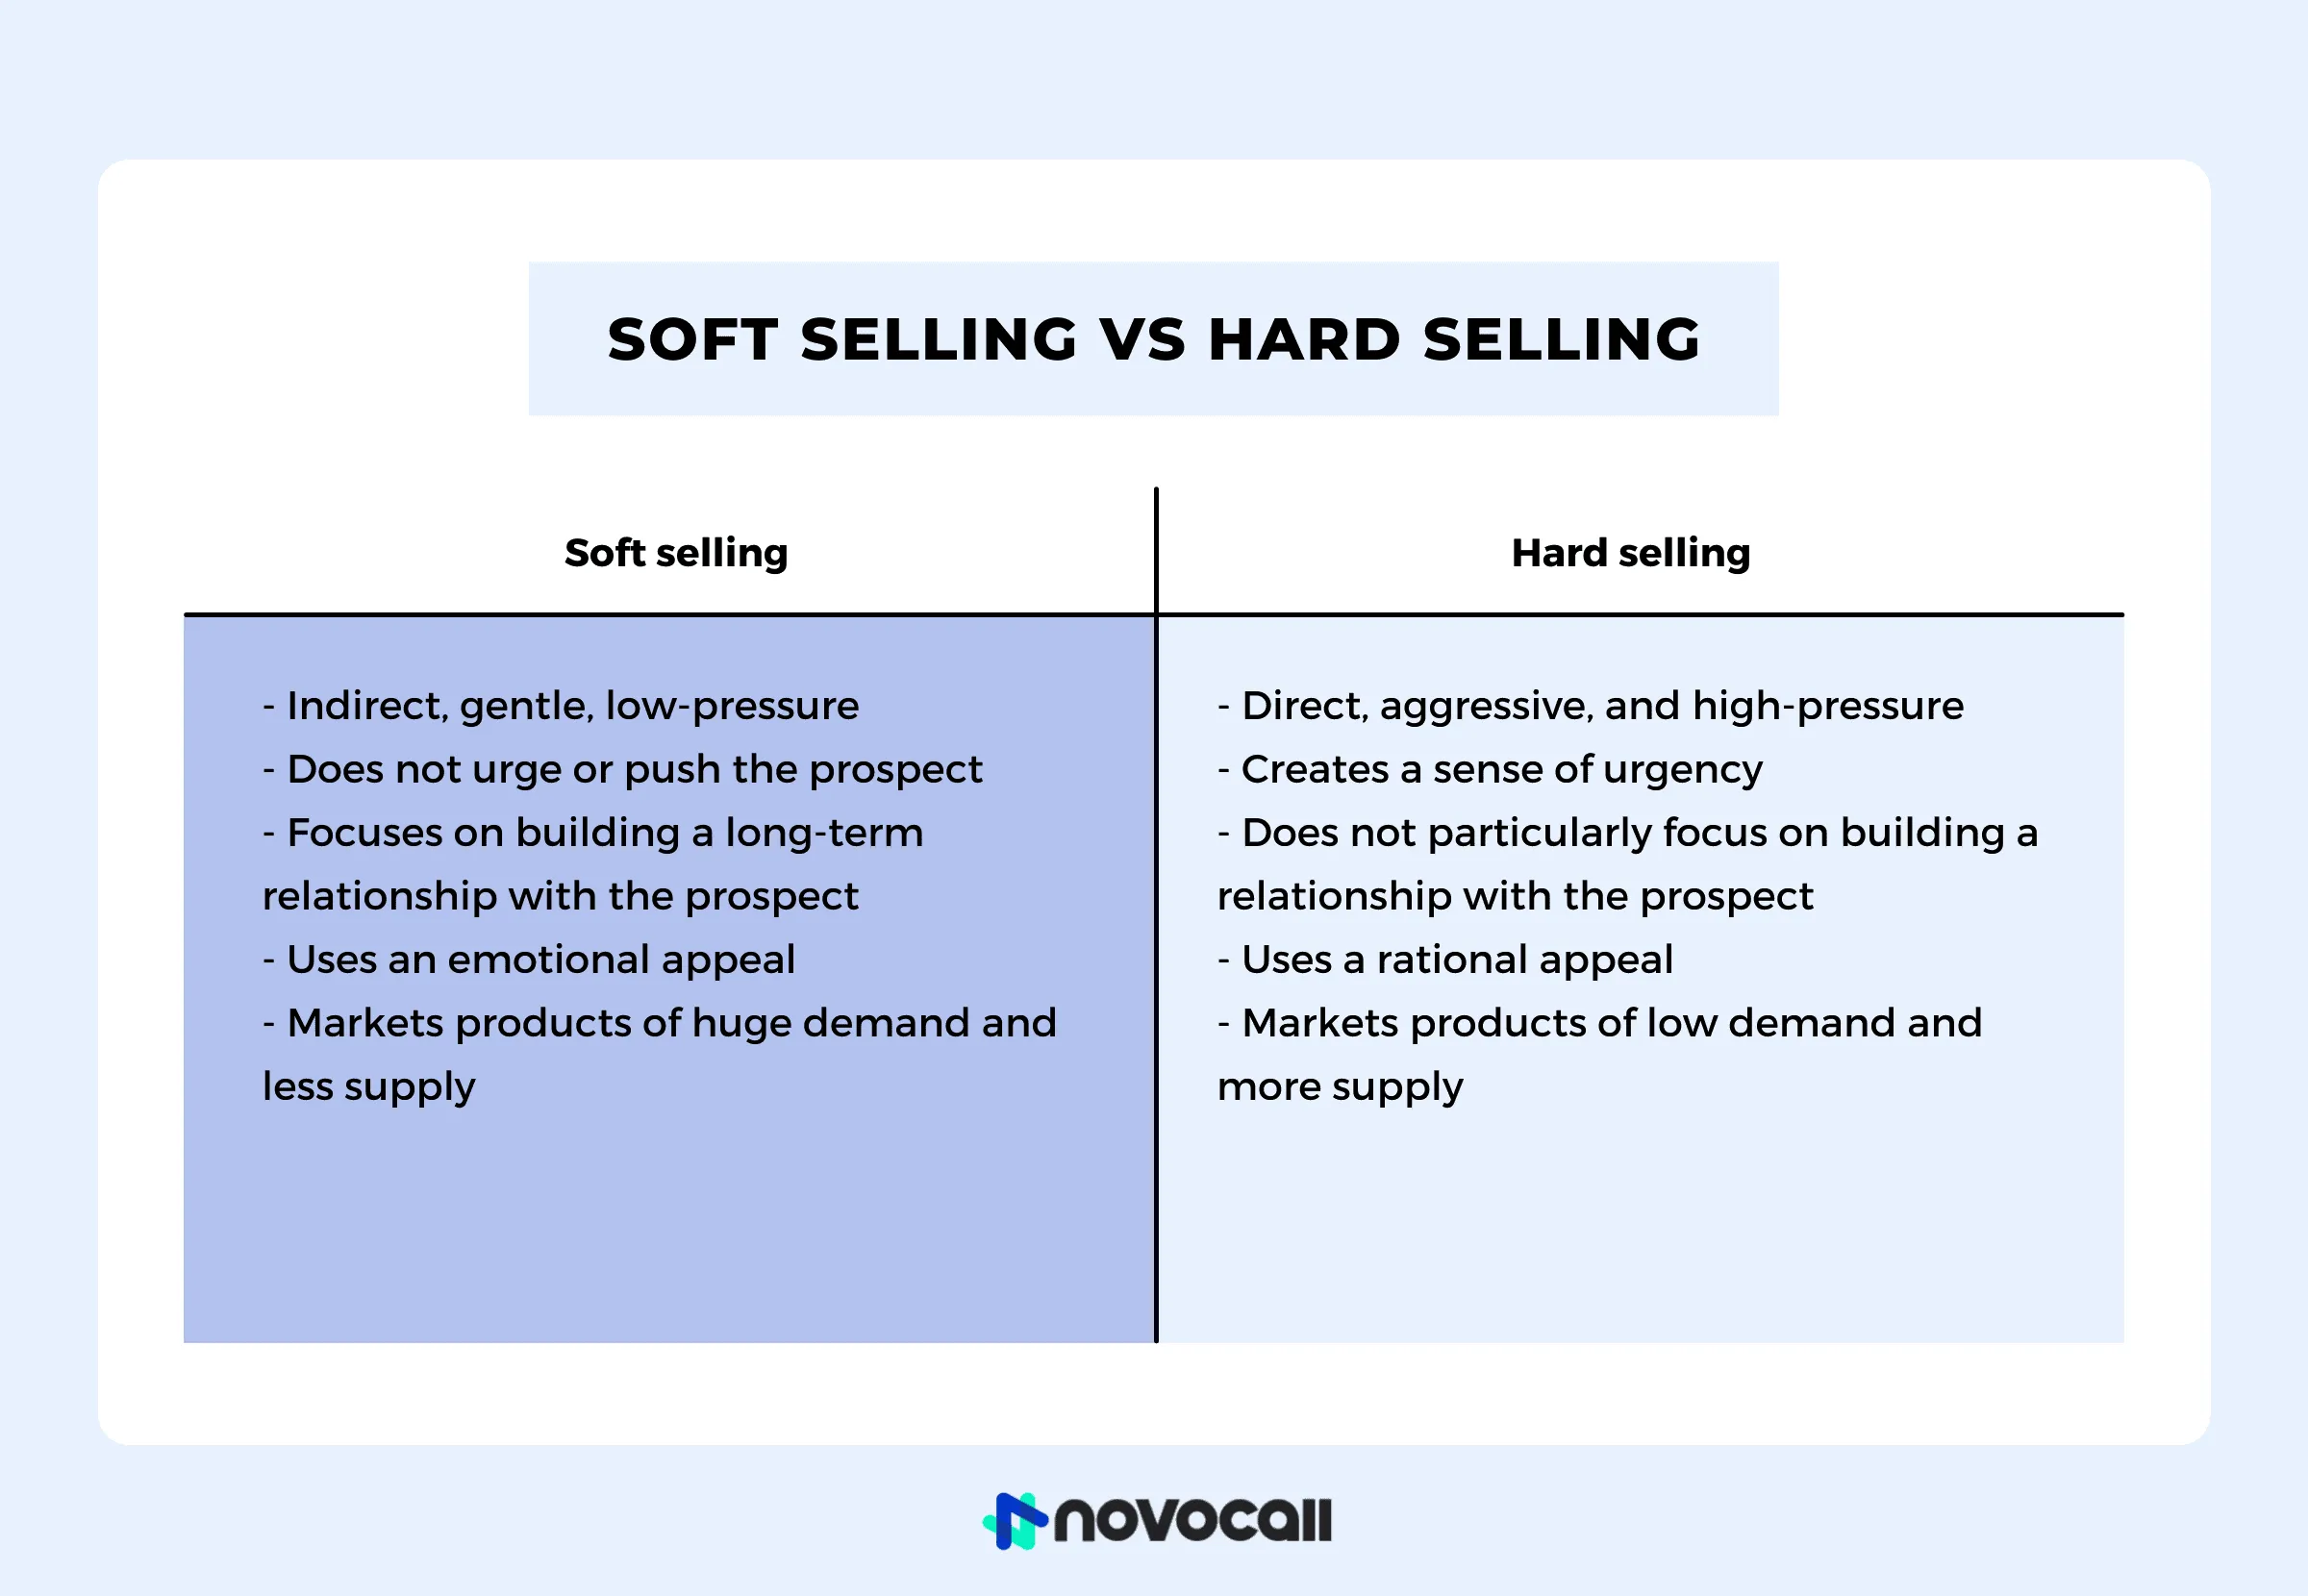 the differences between soft selling and hard selling